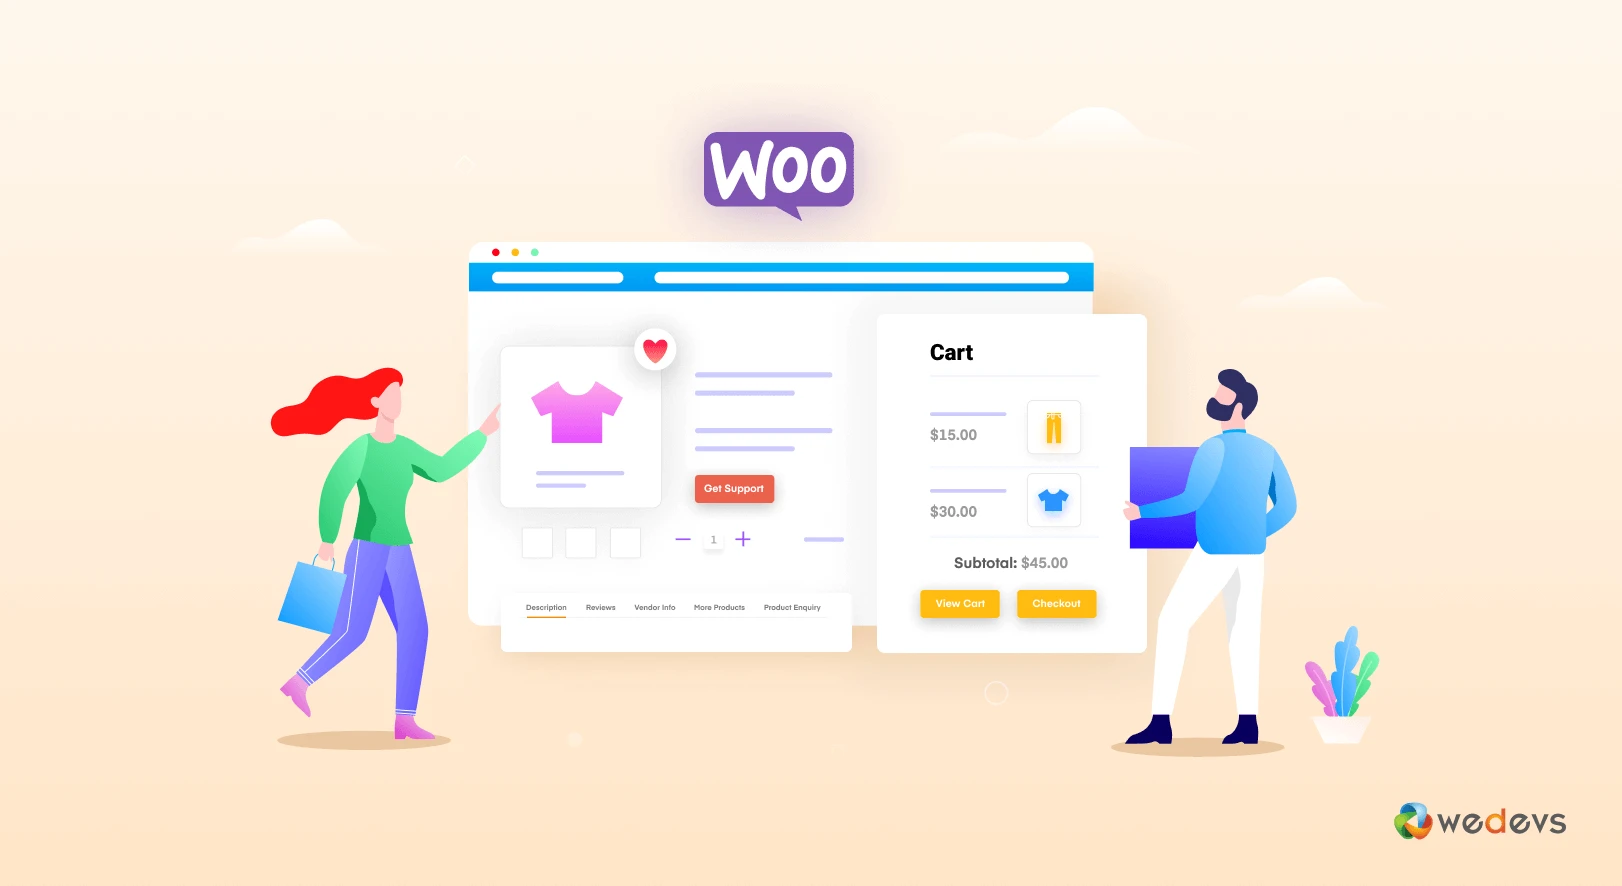 How to Customize WooCommerce Product Page (3 Simple Ways)